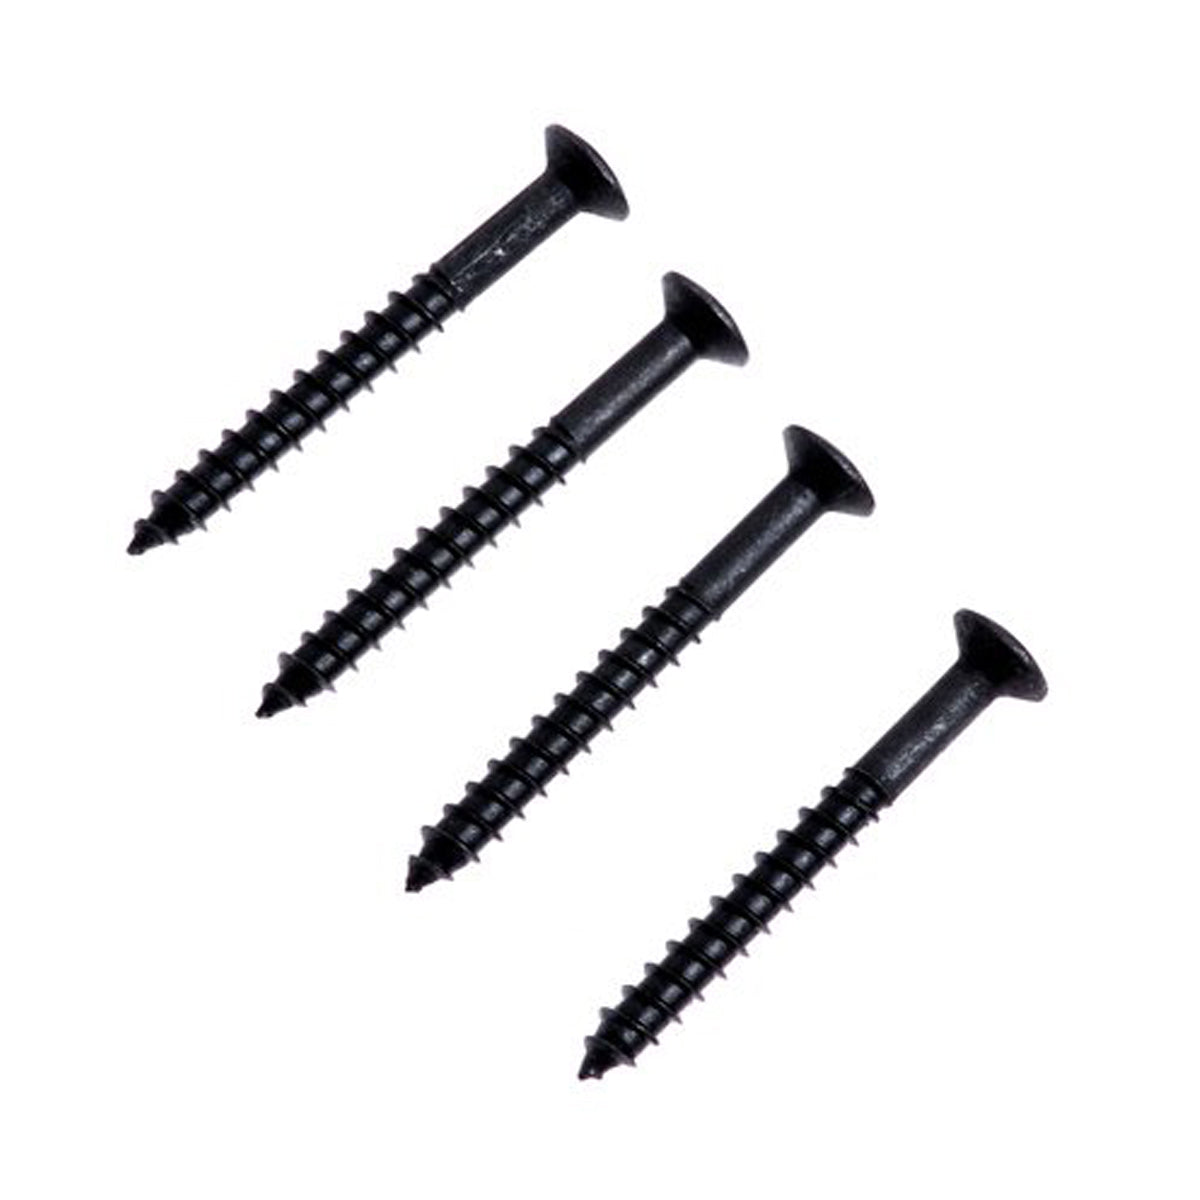 Musiclily 5x45mm Guitar Neck Plate Mounting Screws,Black( 8 Pieces)